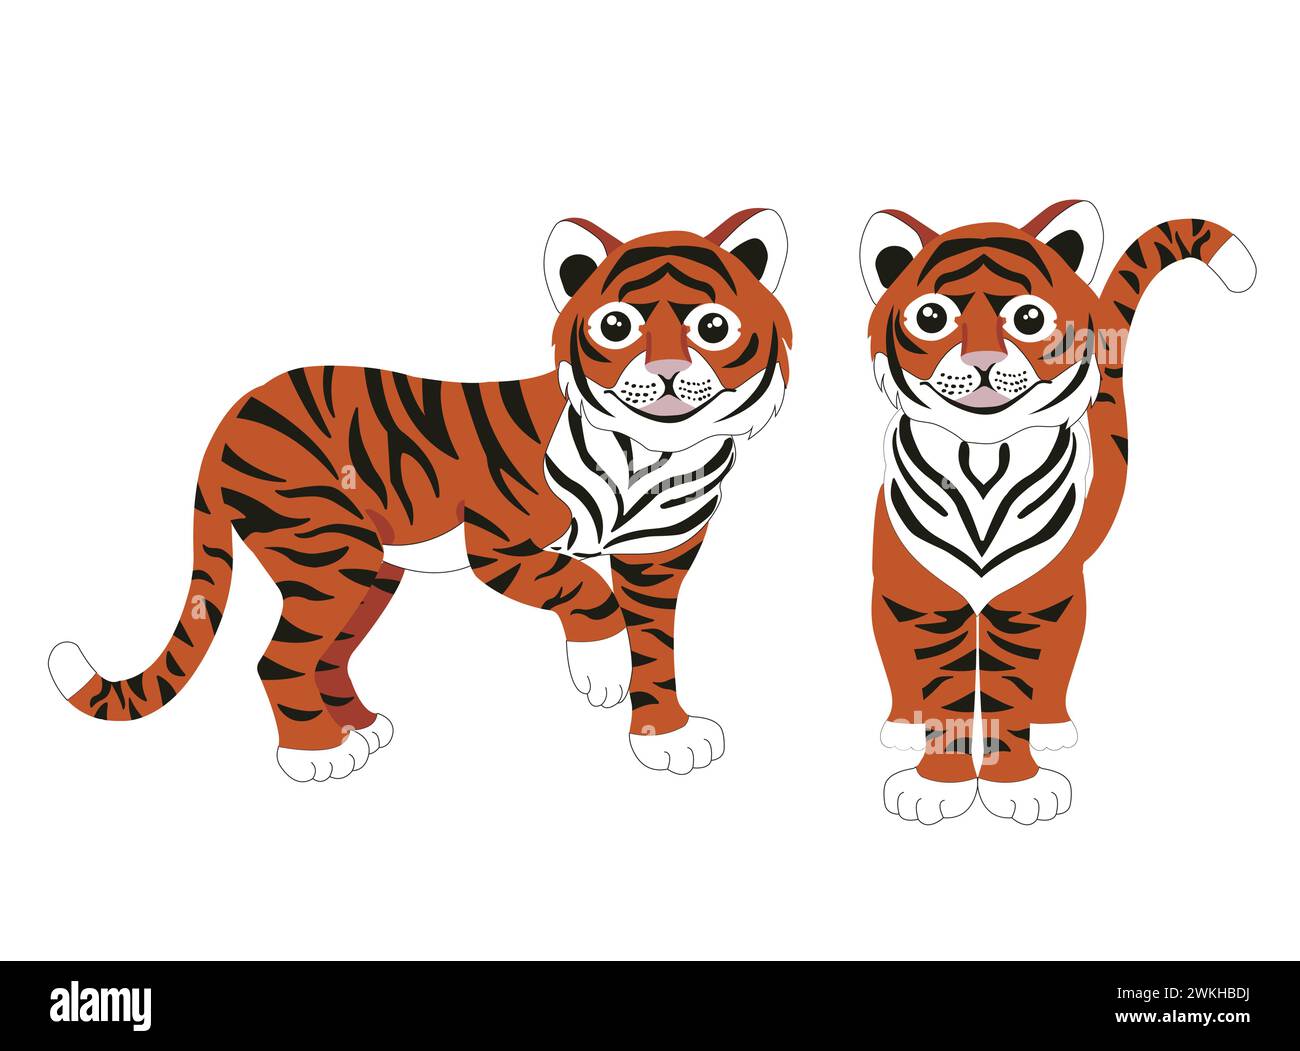 Chinese tiger. Vector stock illustration isolated on white background. Stock Vector